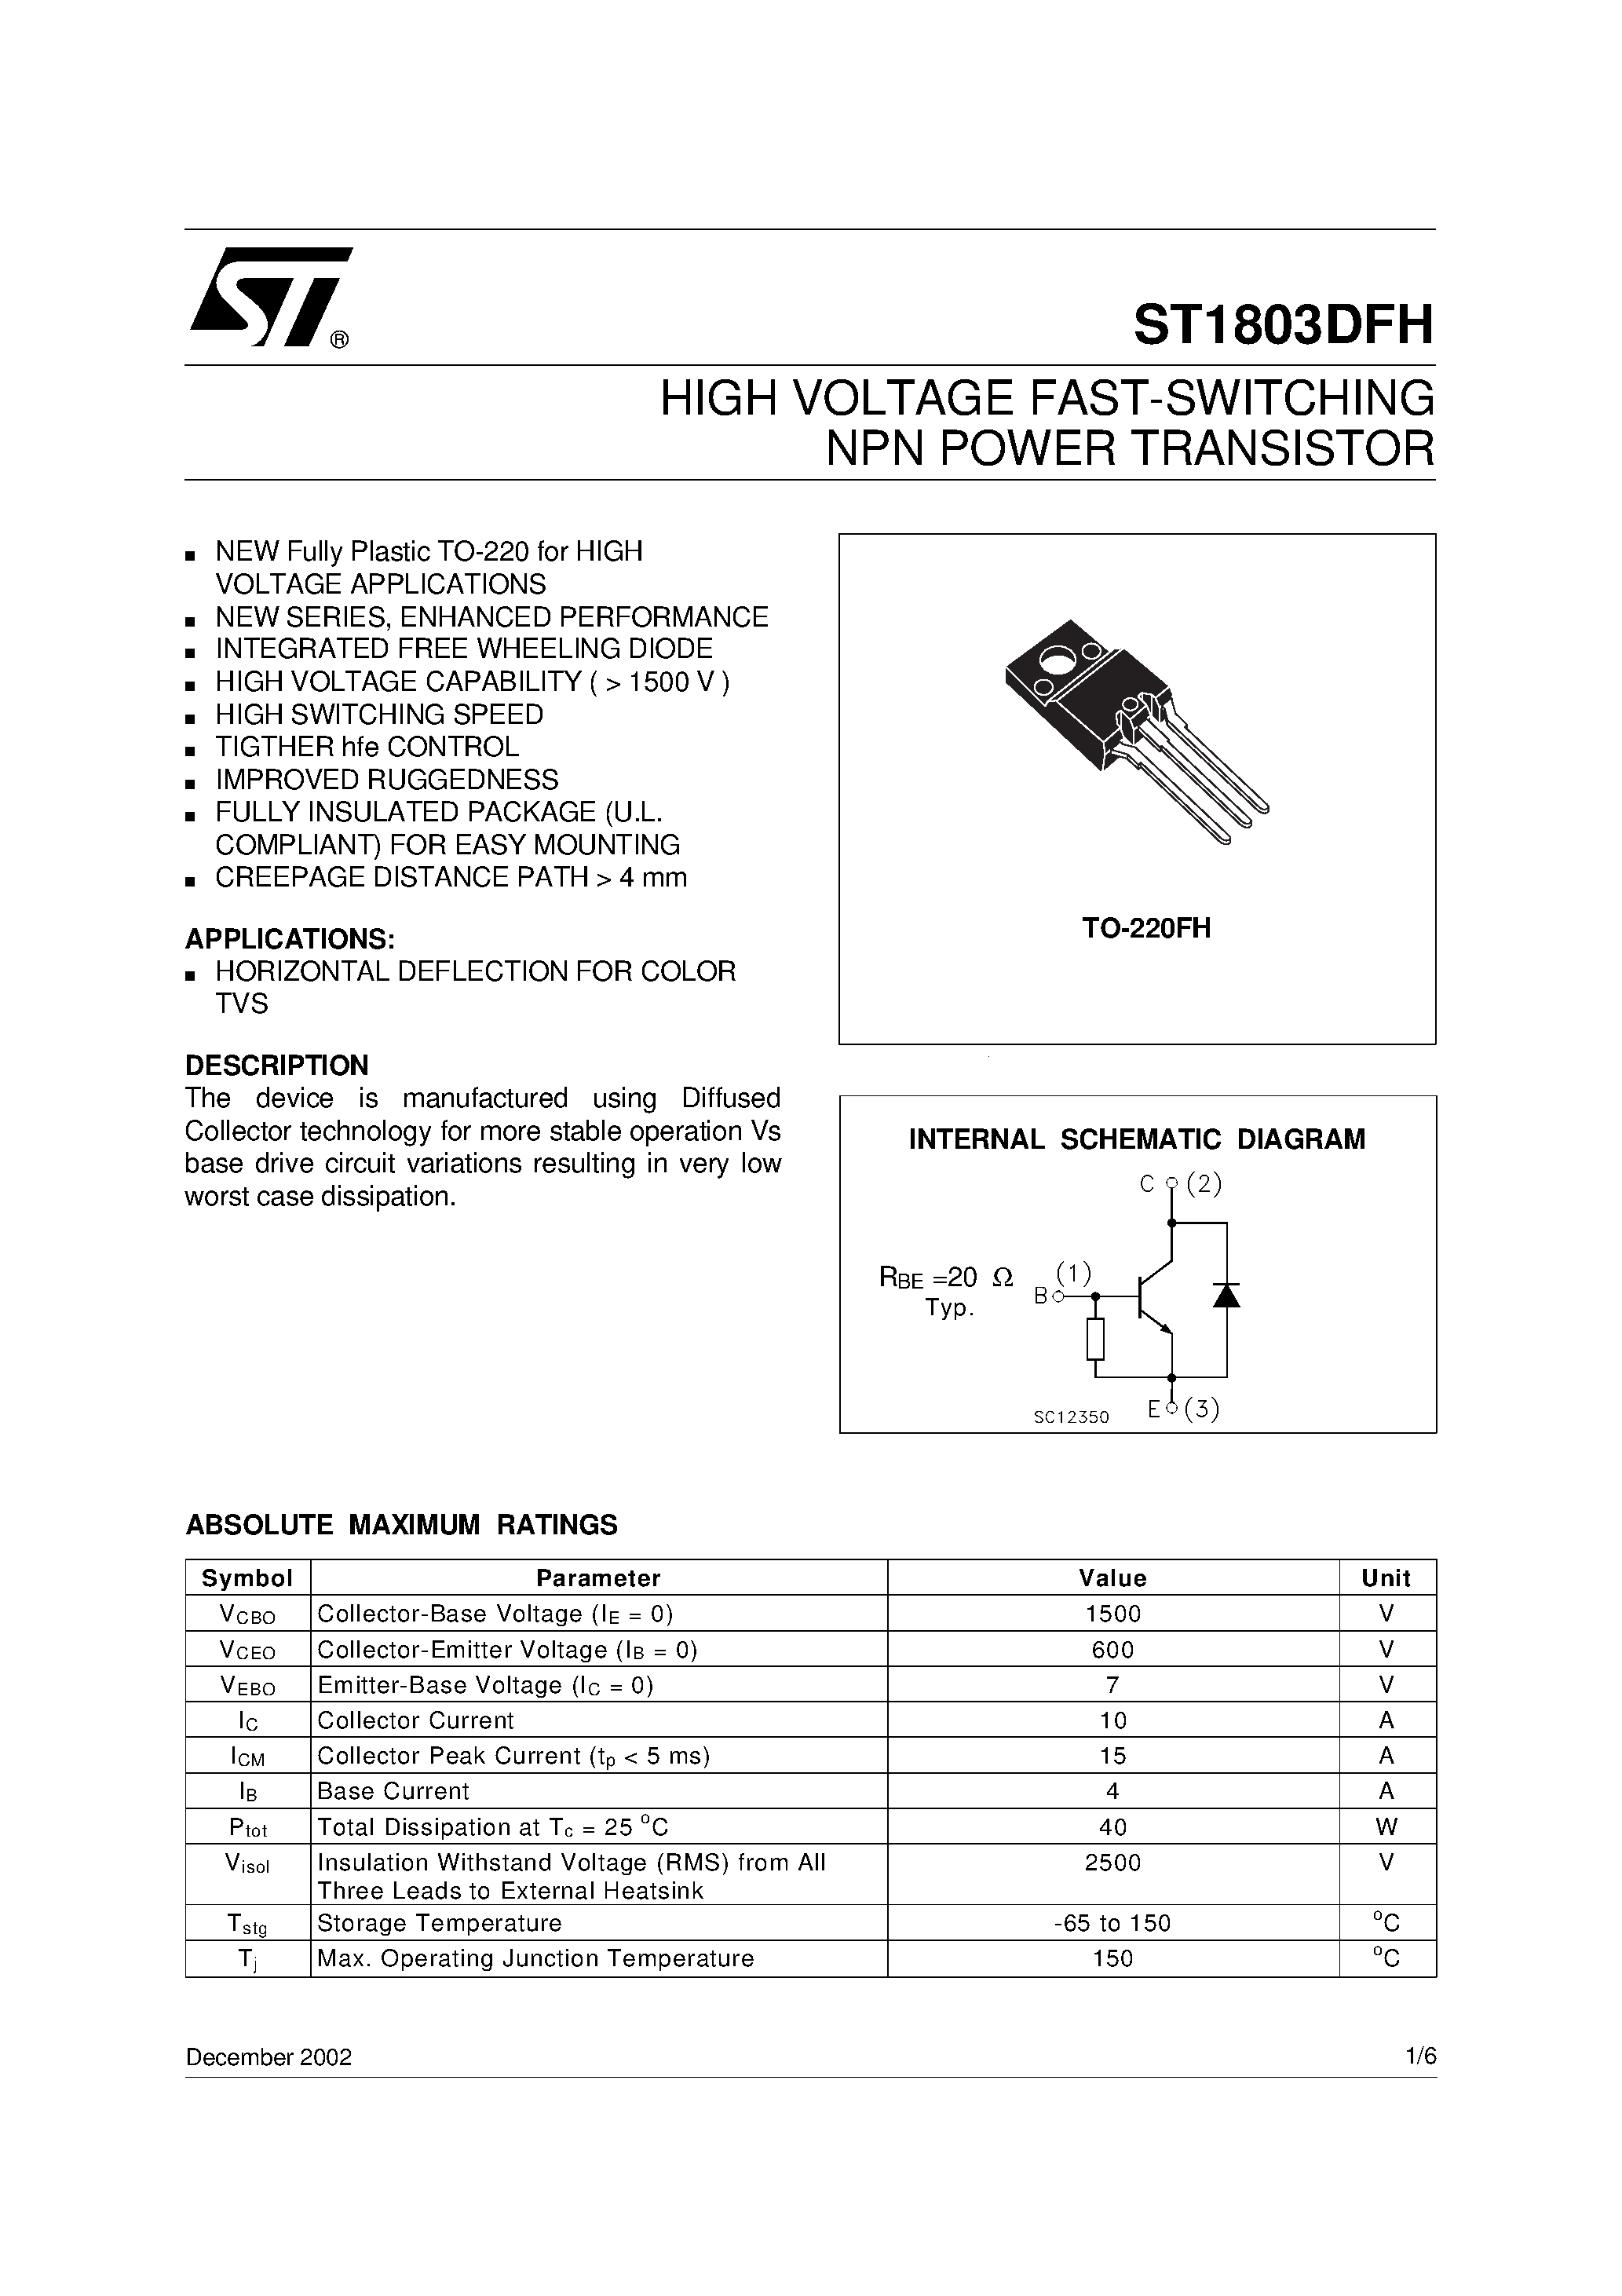 Datasheet ST1803DFH - HIGH VOLTAGE FAST-SWITCHING NPN POWER TRANSISTOR page 1